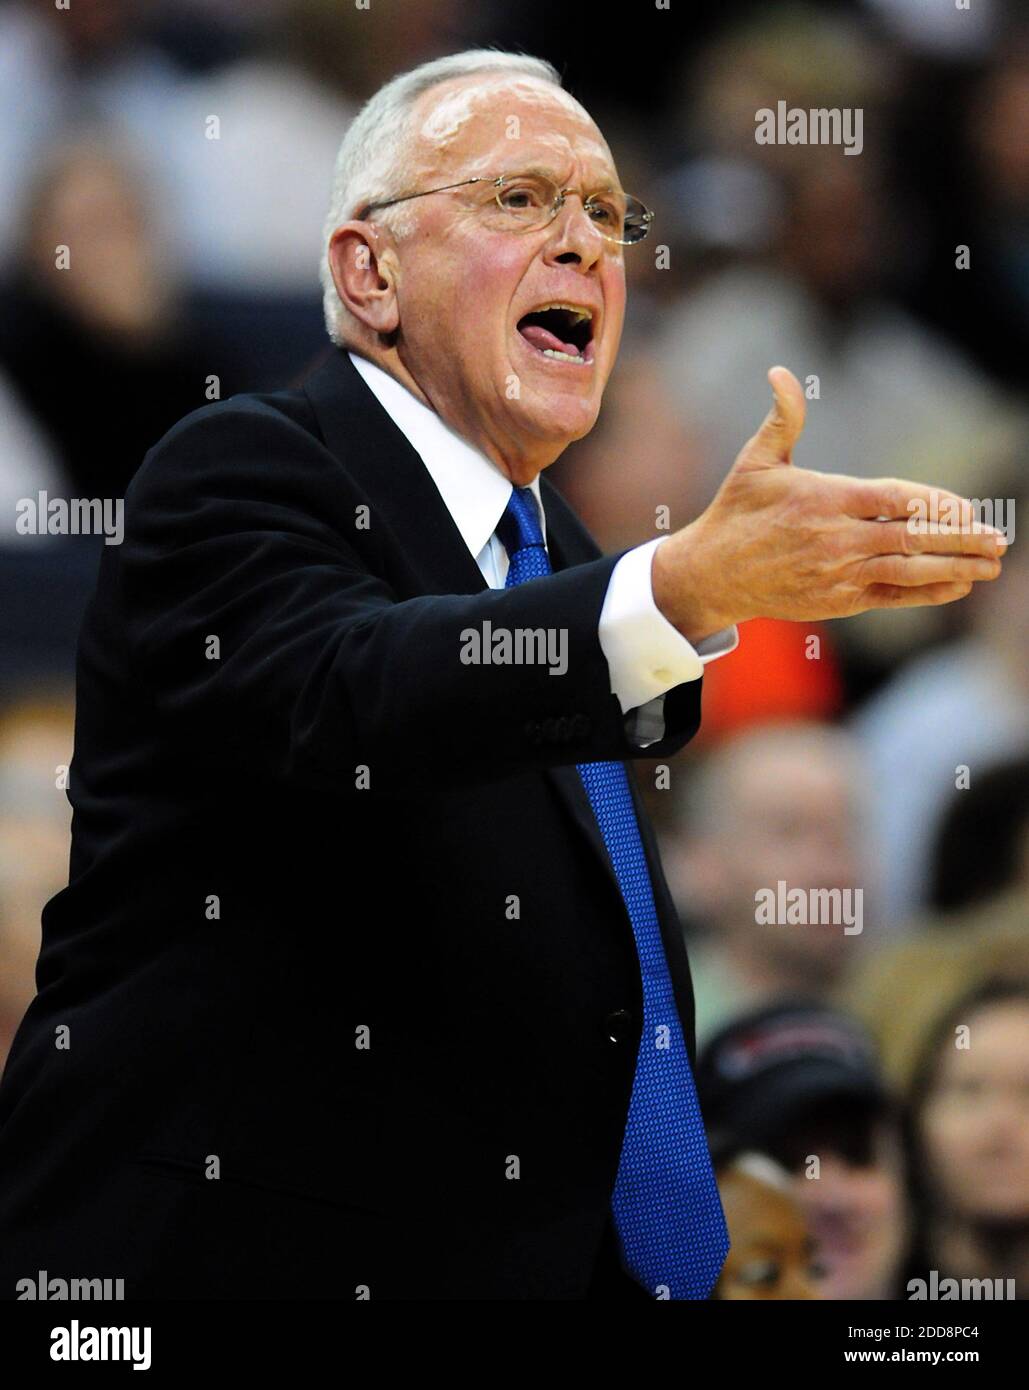 NO FILM, NO VIDEO, NO TV, NO DOCUMENTARY - Charlotte Bobcats head coach Larry Brown argues a call during the Bobcats game against the Phoenix Suns at Time Warner Cable Arena in Charlotte, NC, USA on January 23, 2009. The Bobcats defeated the Suns 98-76. Photo by Jeff Siner/Charlotte Observer/MCT/ABACAPRESS.COM Stock Photo